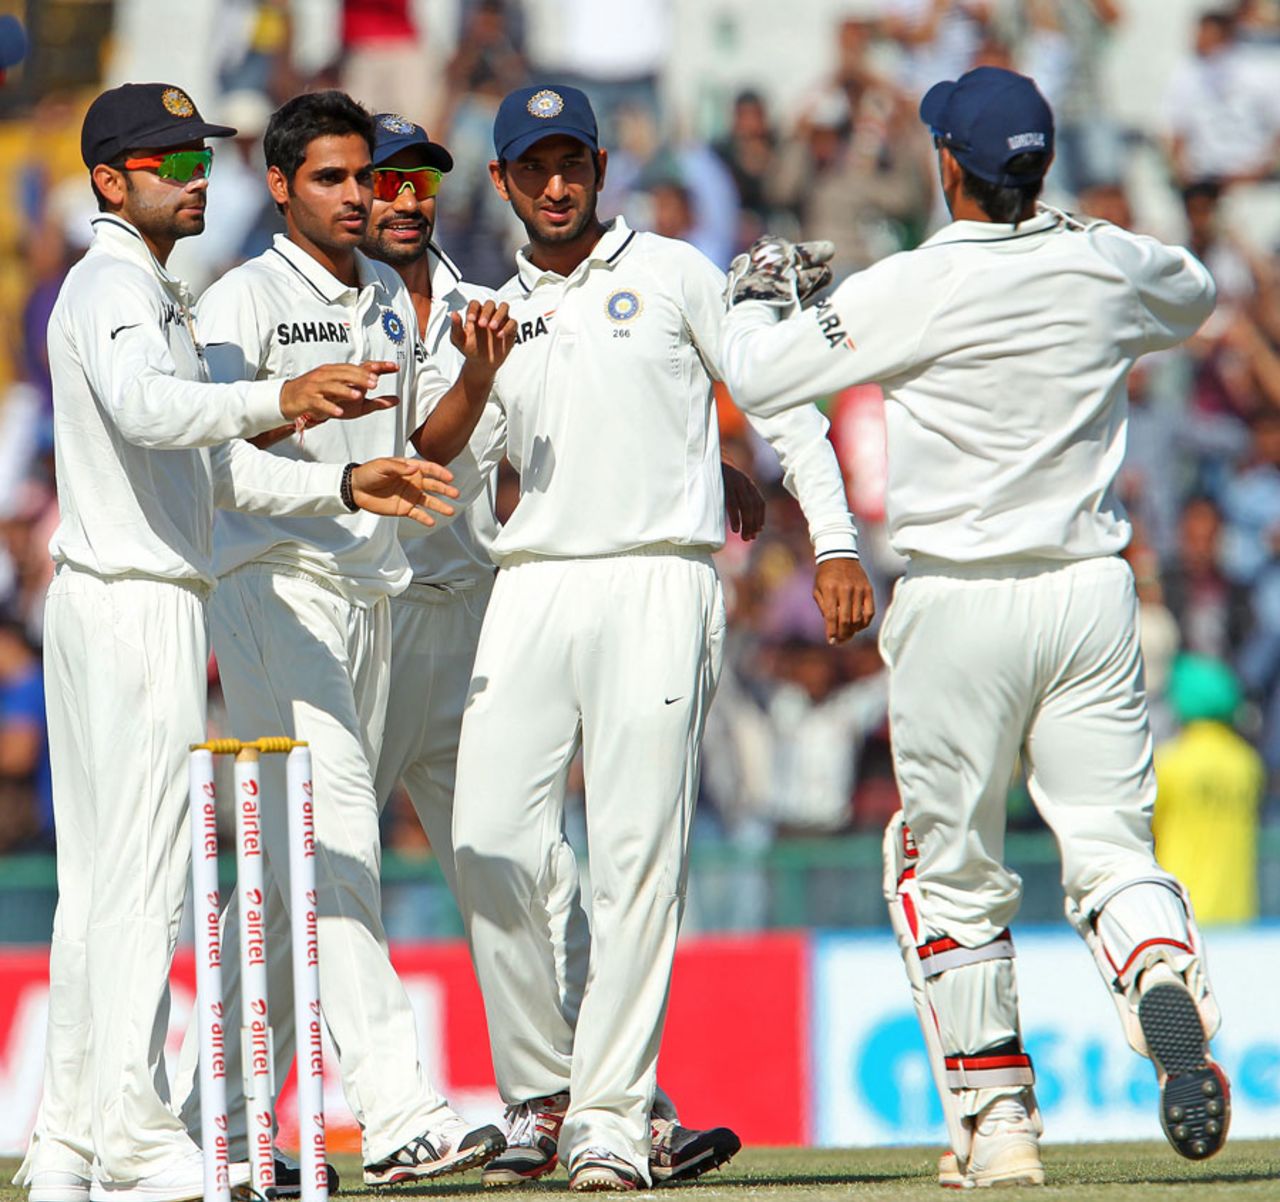 India get together after a wicket, India v Australia, 3rd Test, Mohali, 4th day, March 17, 2013